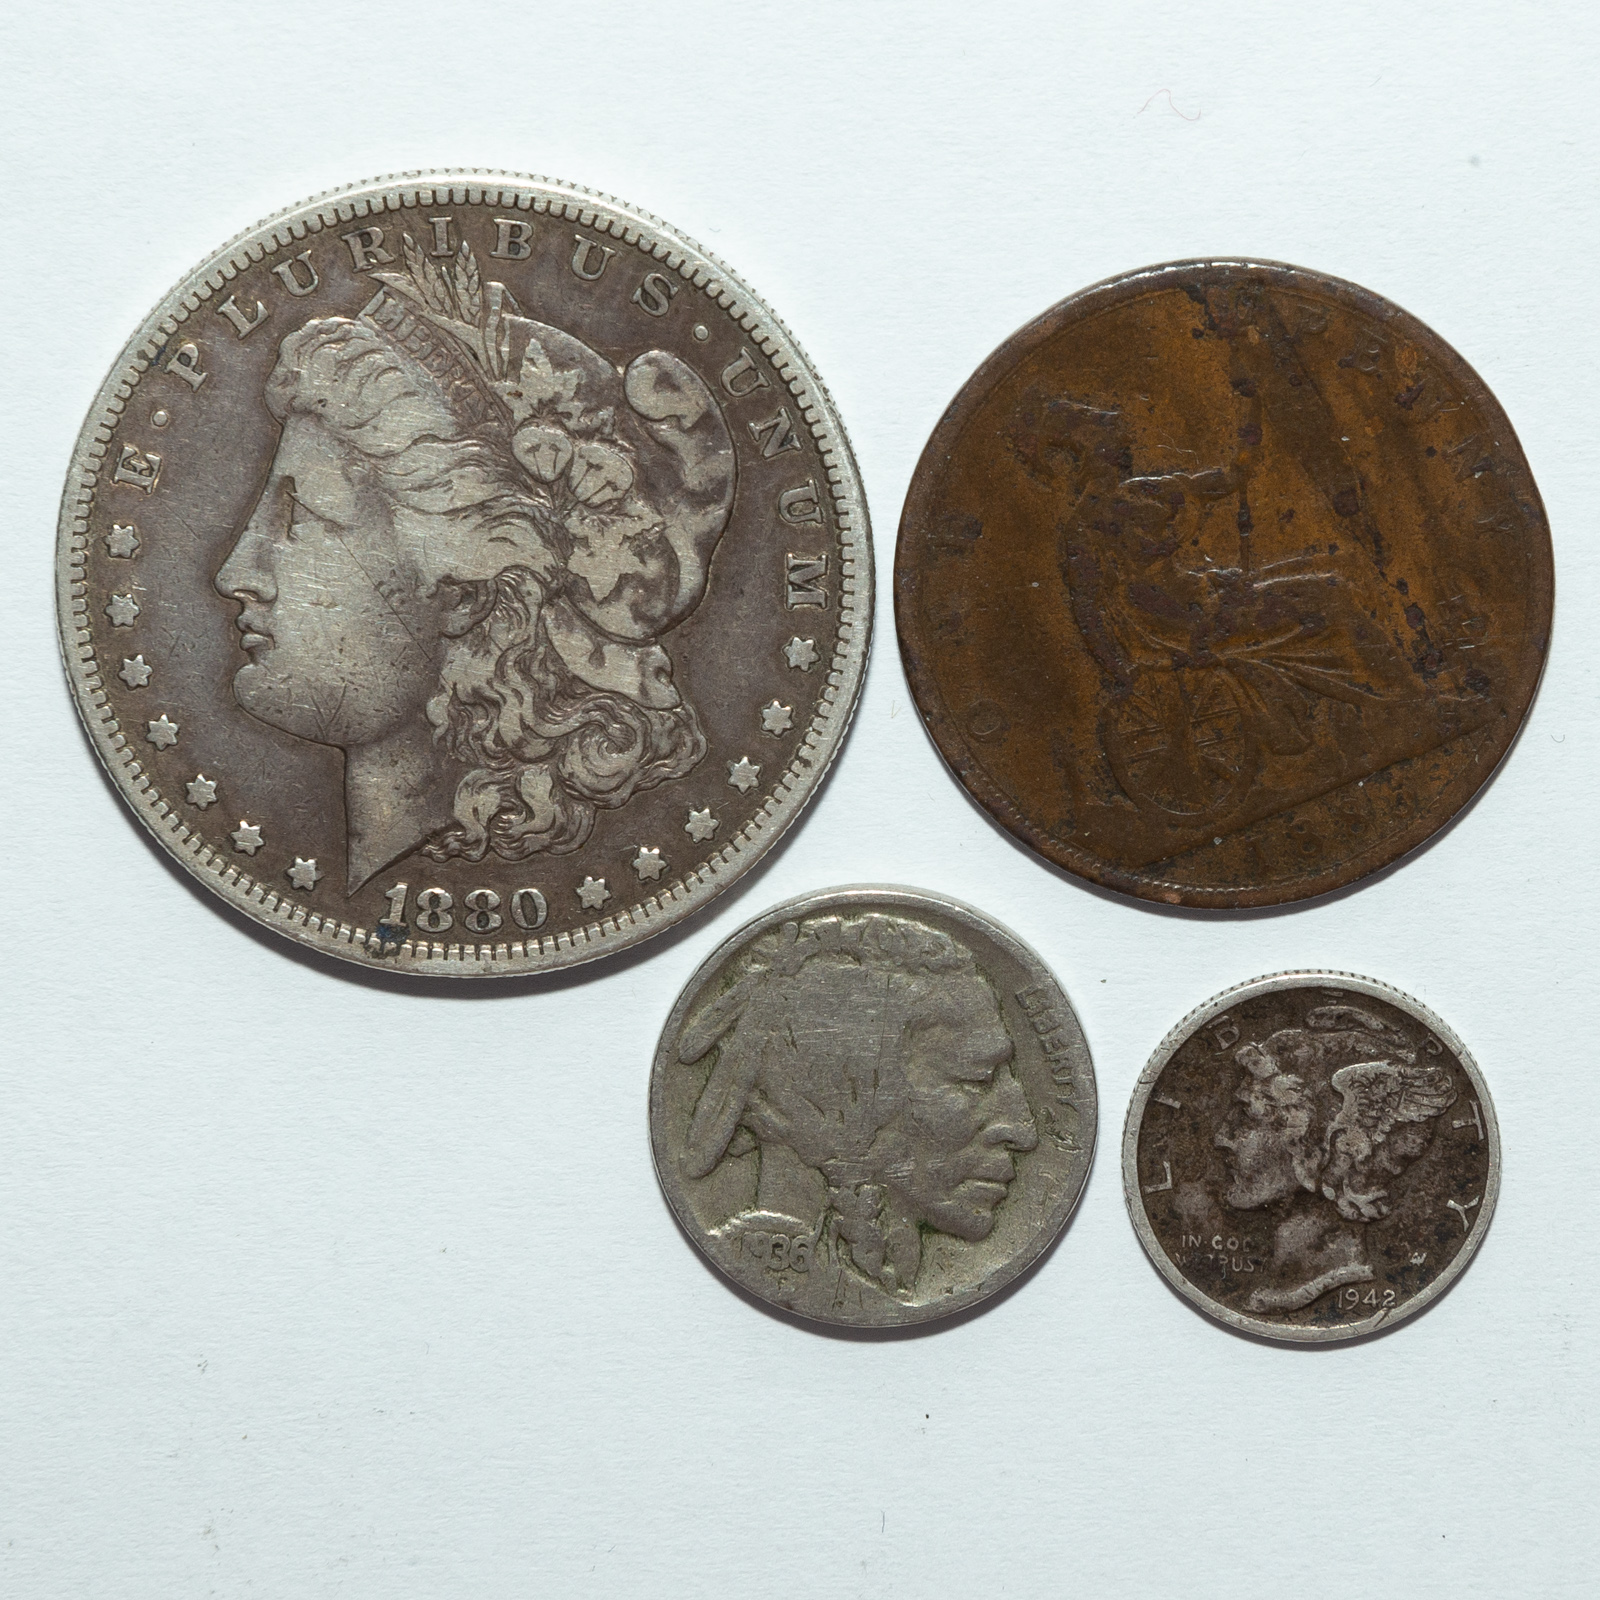 SMALL GROUP OF COINS WITH 1880 S 338bed